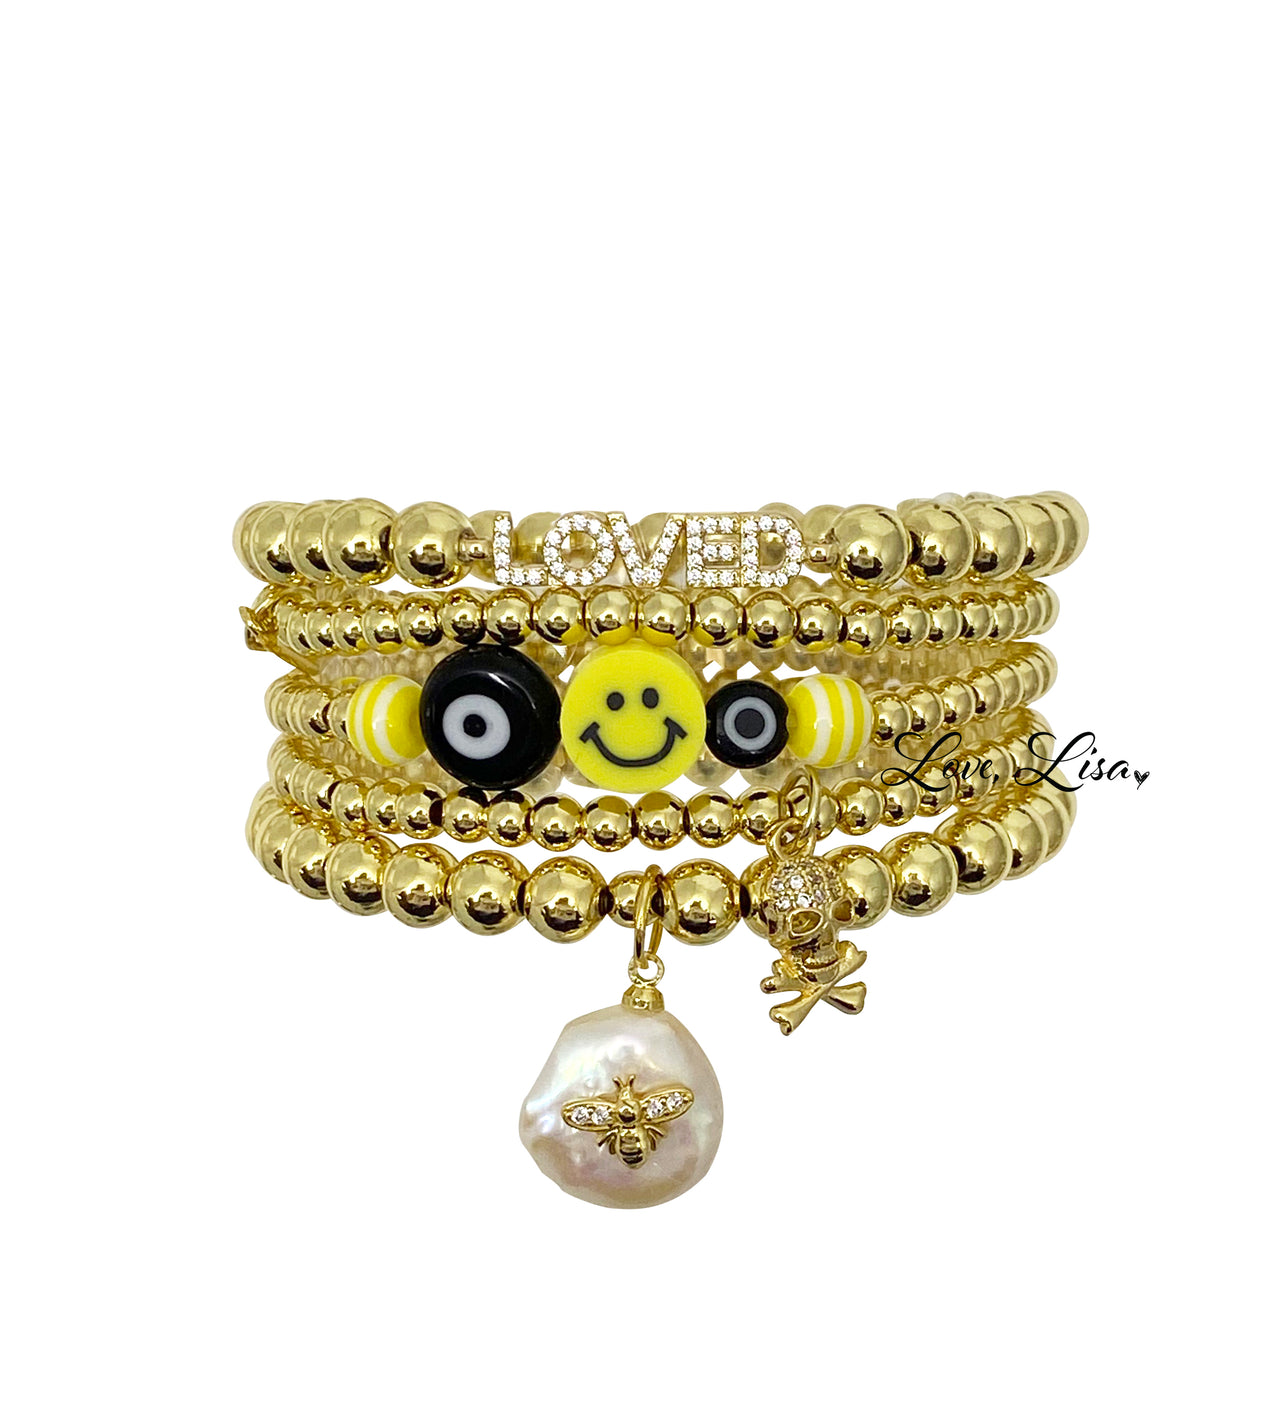 Victoria's Sweet & Spicy Loved Stack of Bracelets